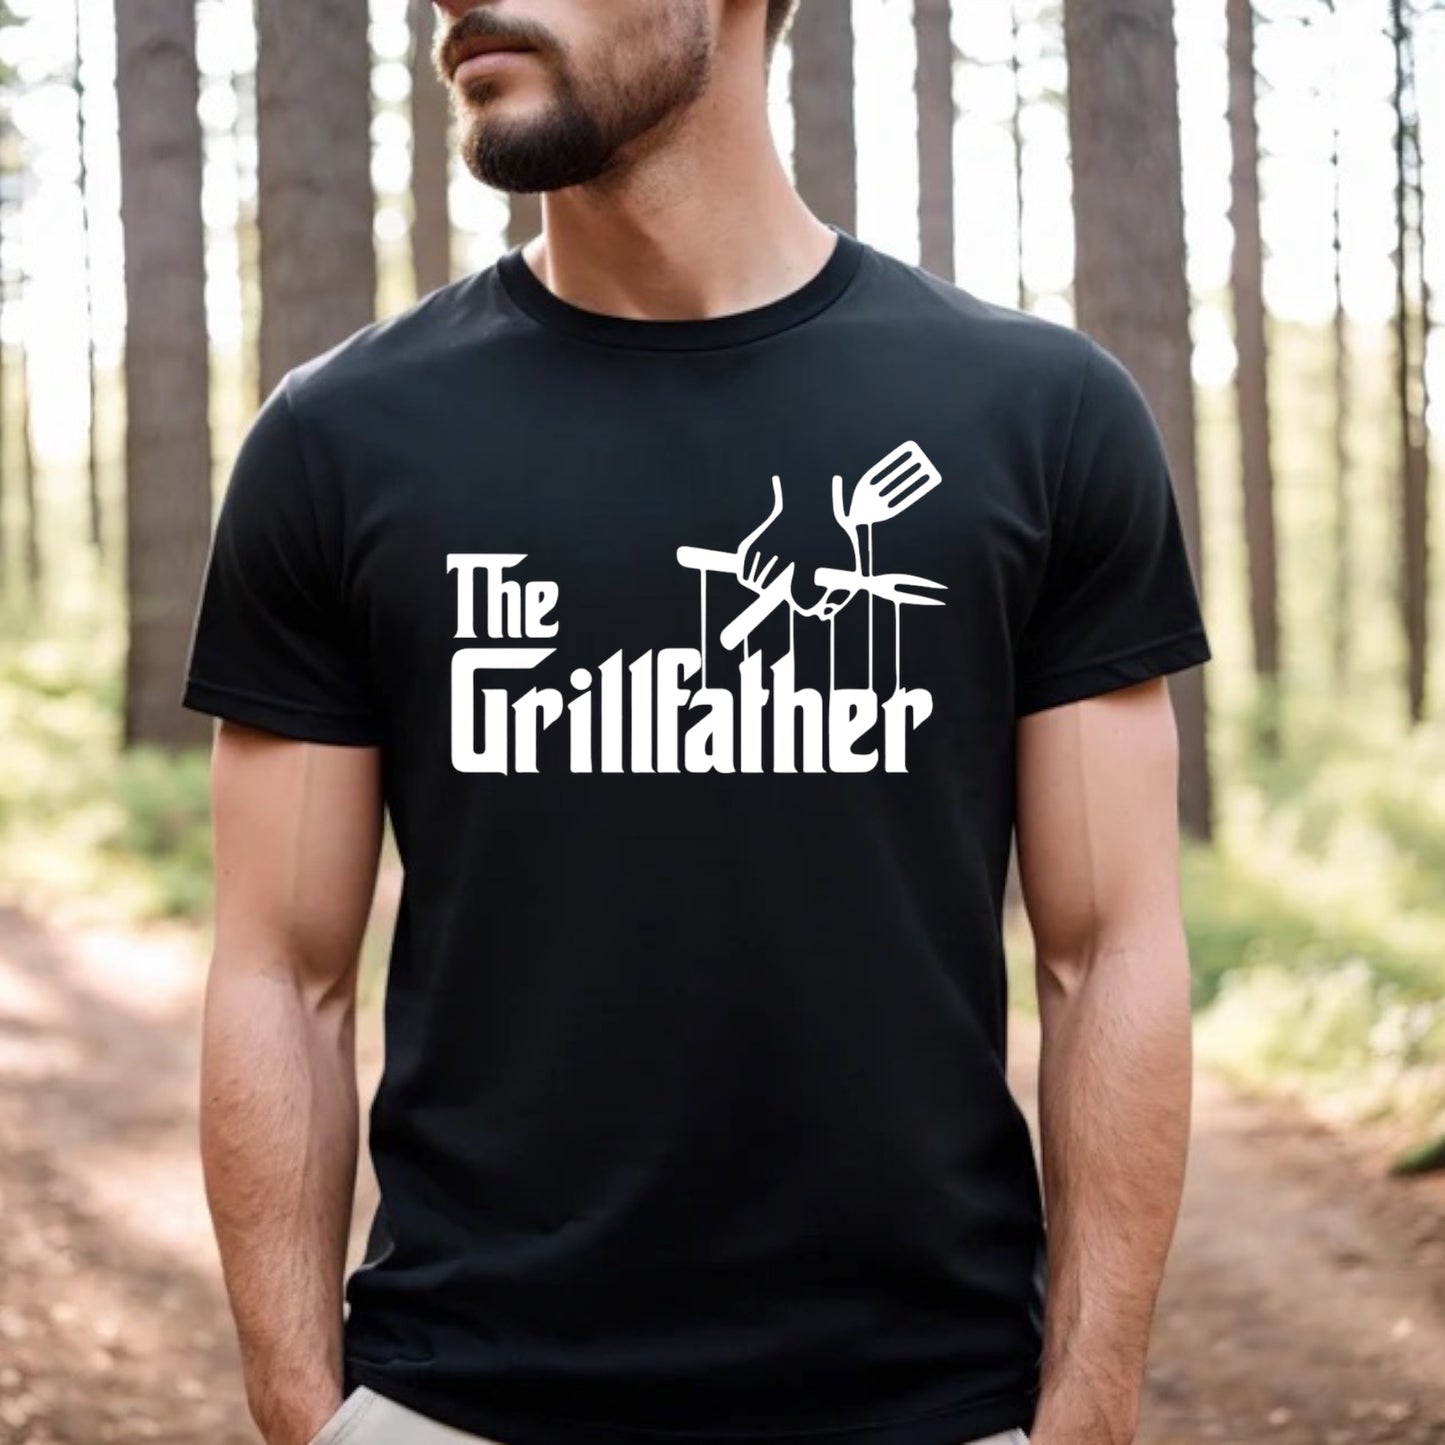 The GrillFather Tee